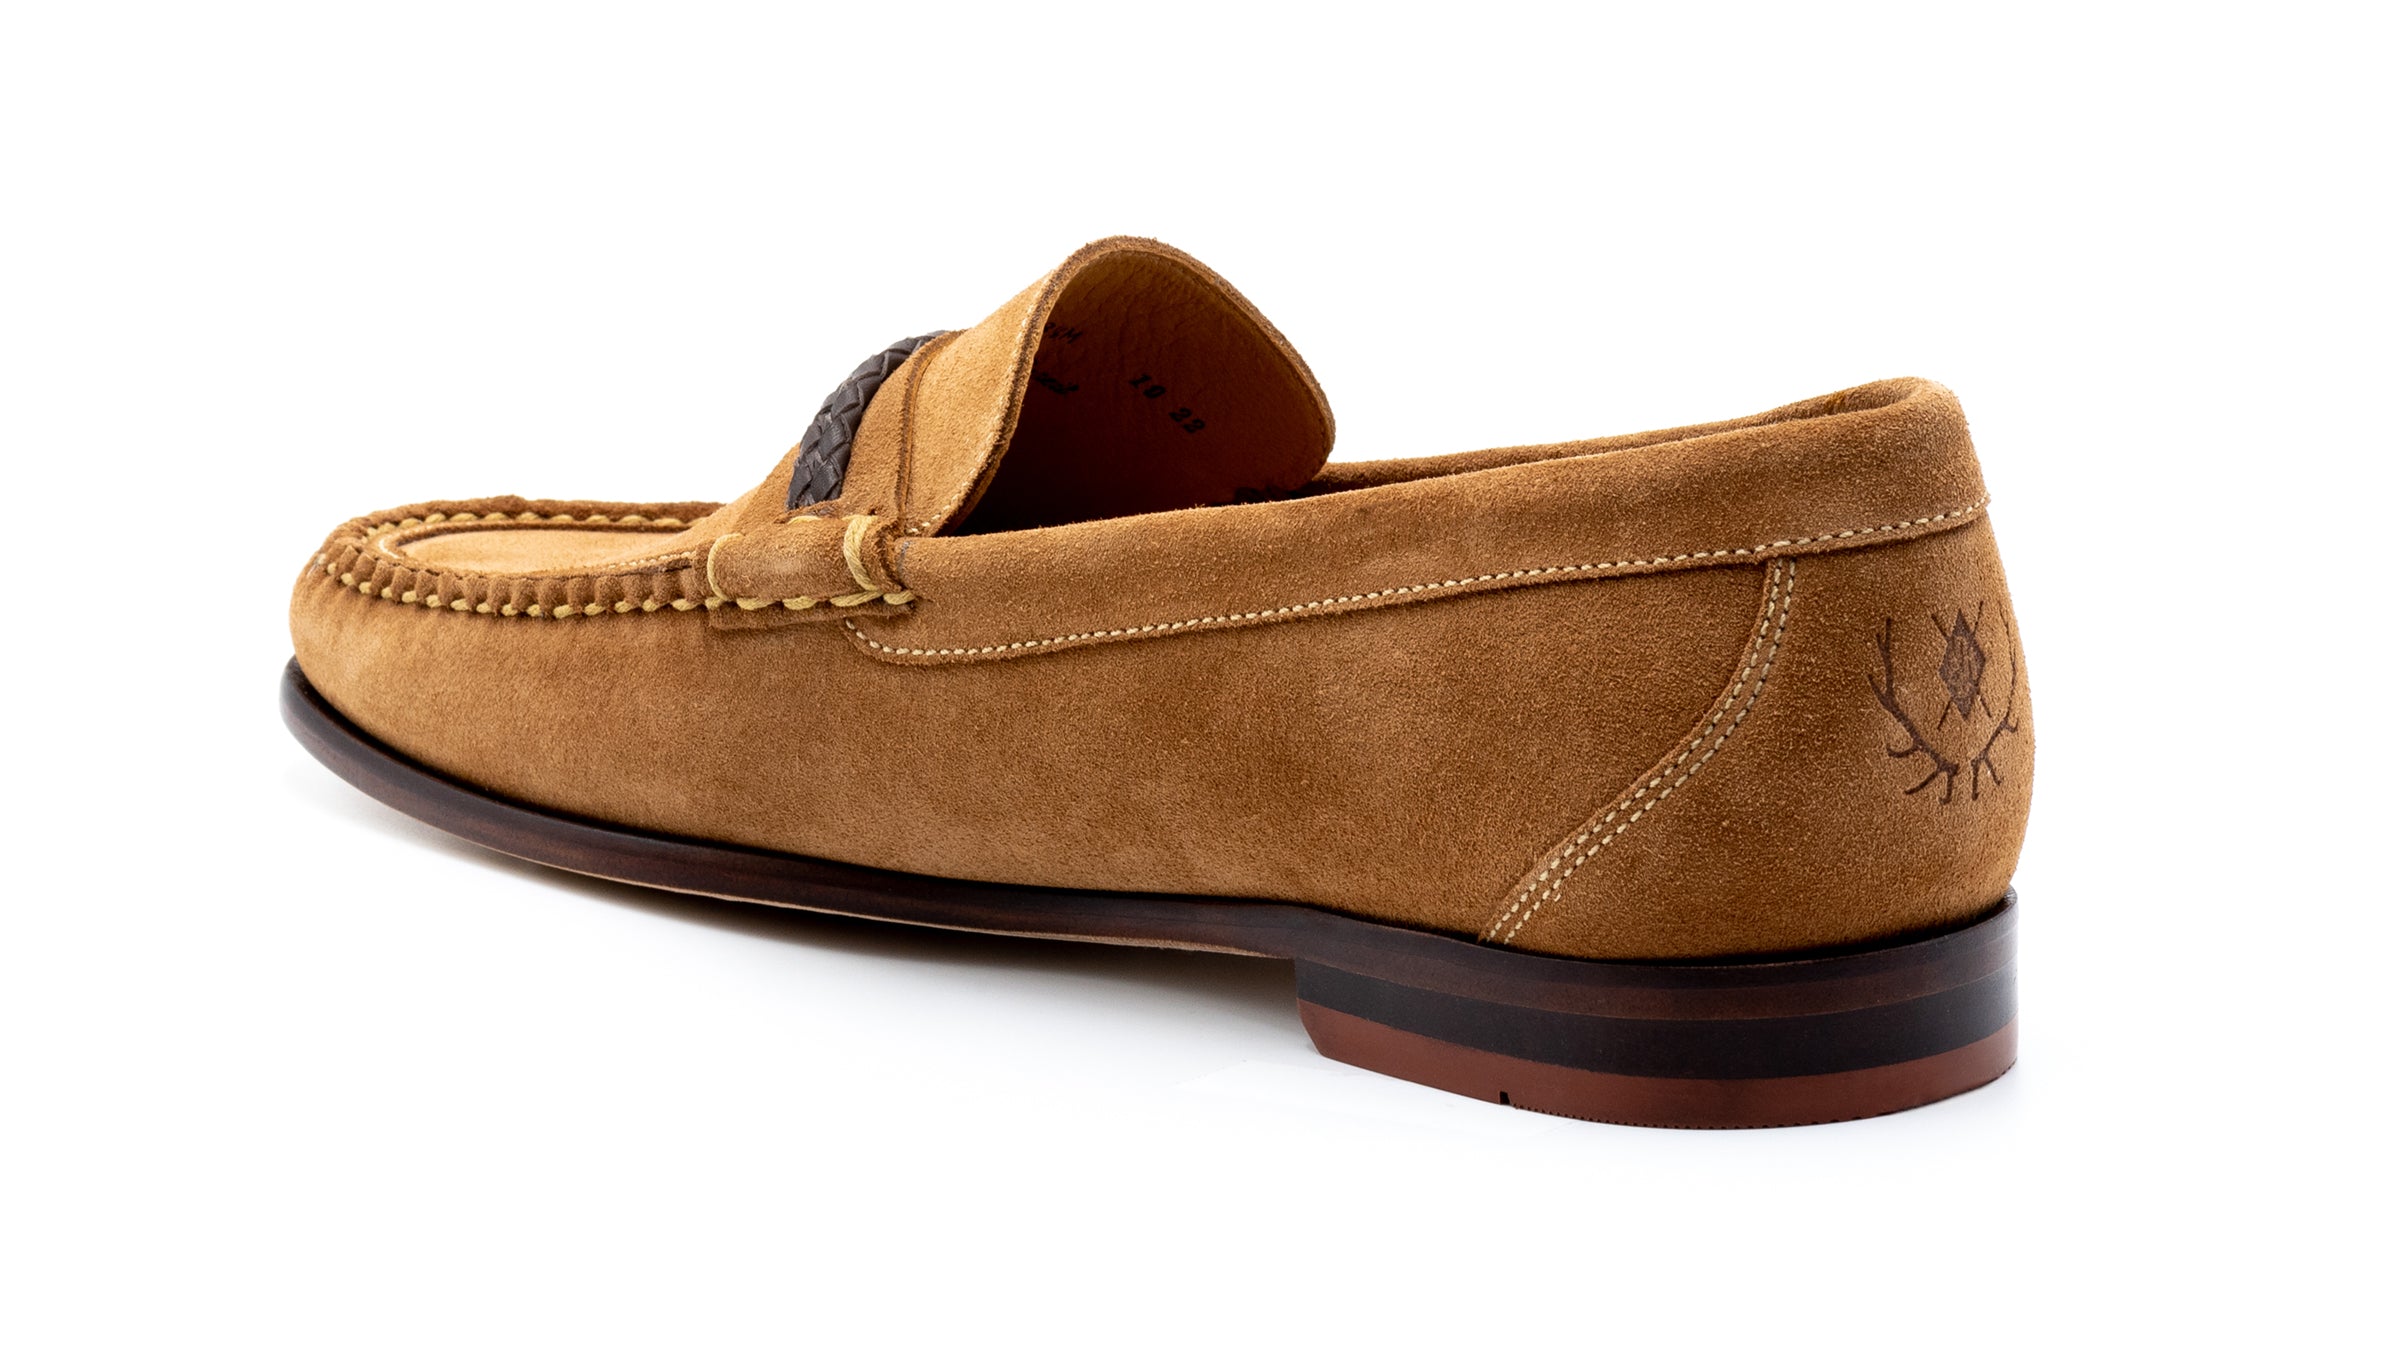 Maxwell Knot Water Repellent Suede Leather Braided Knot Loafers Fren | Martin Dingman